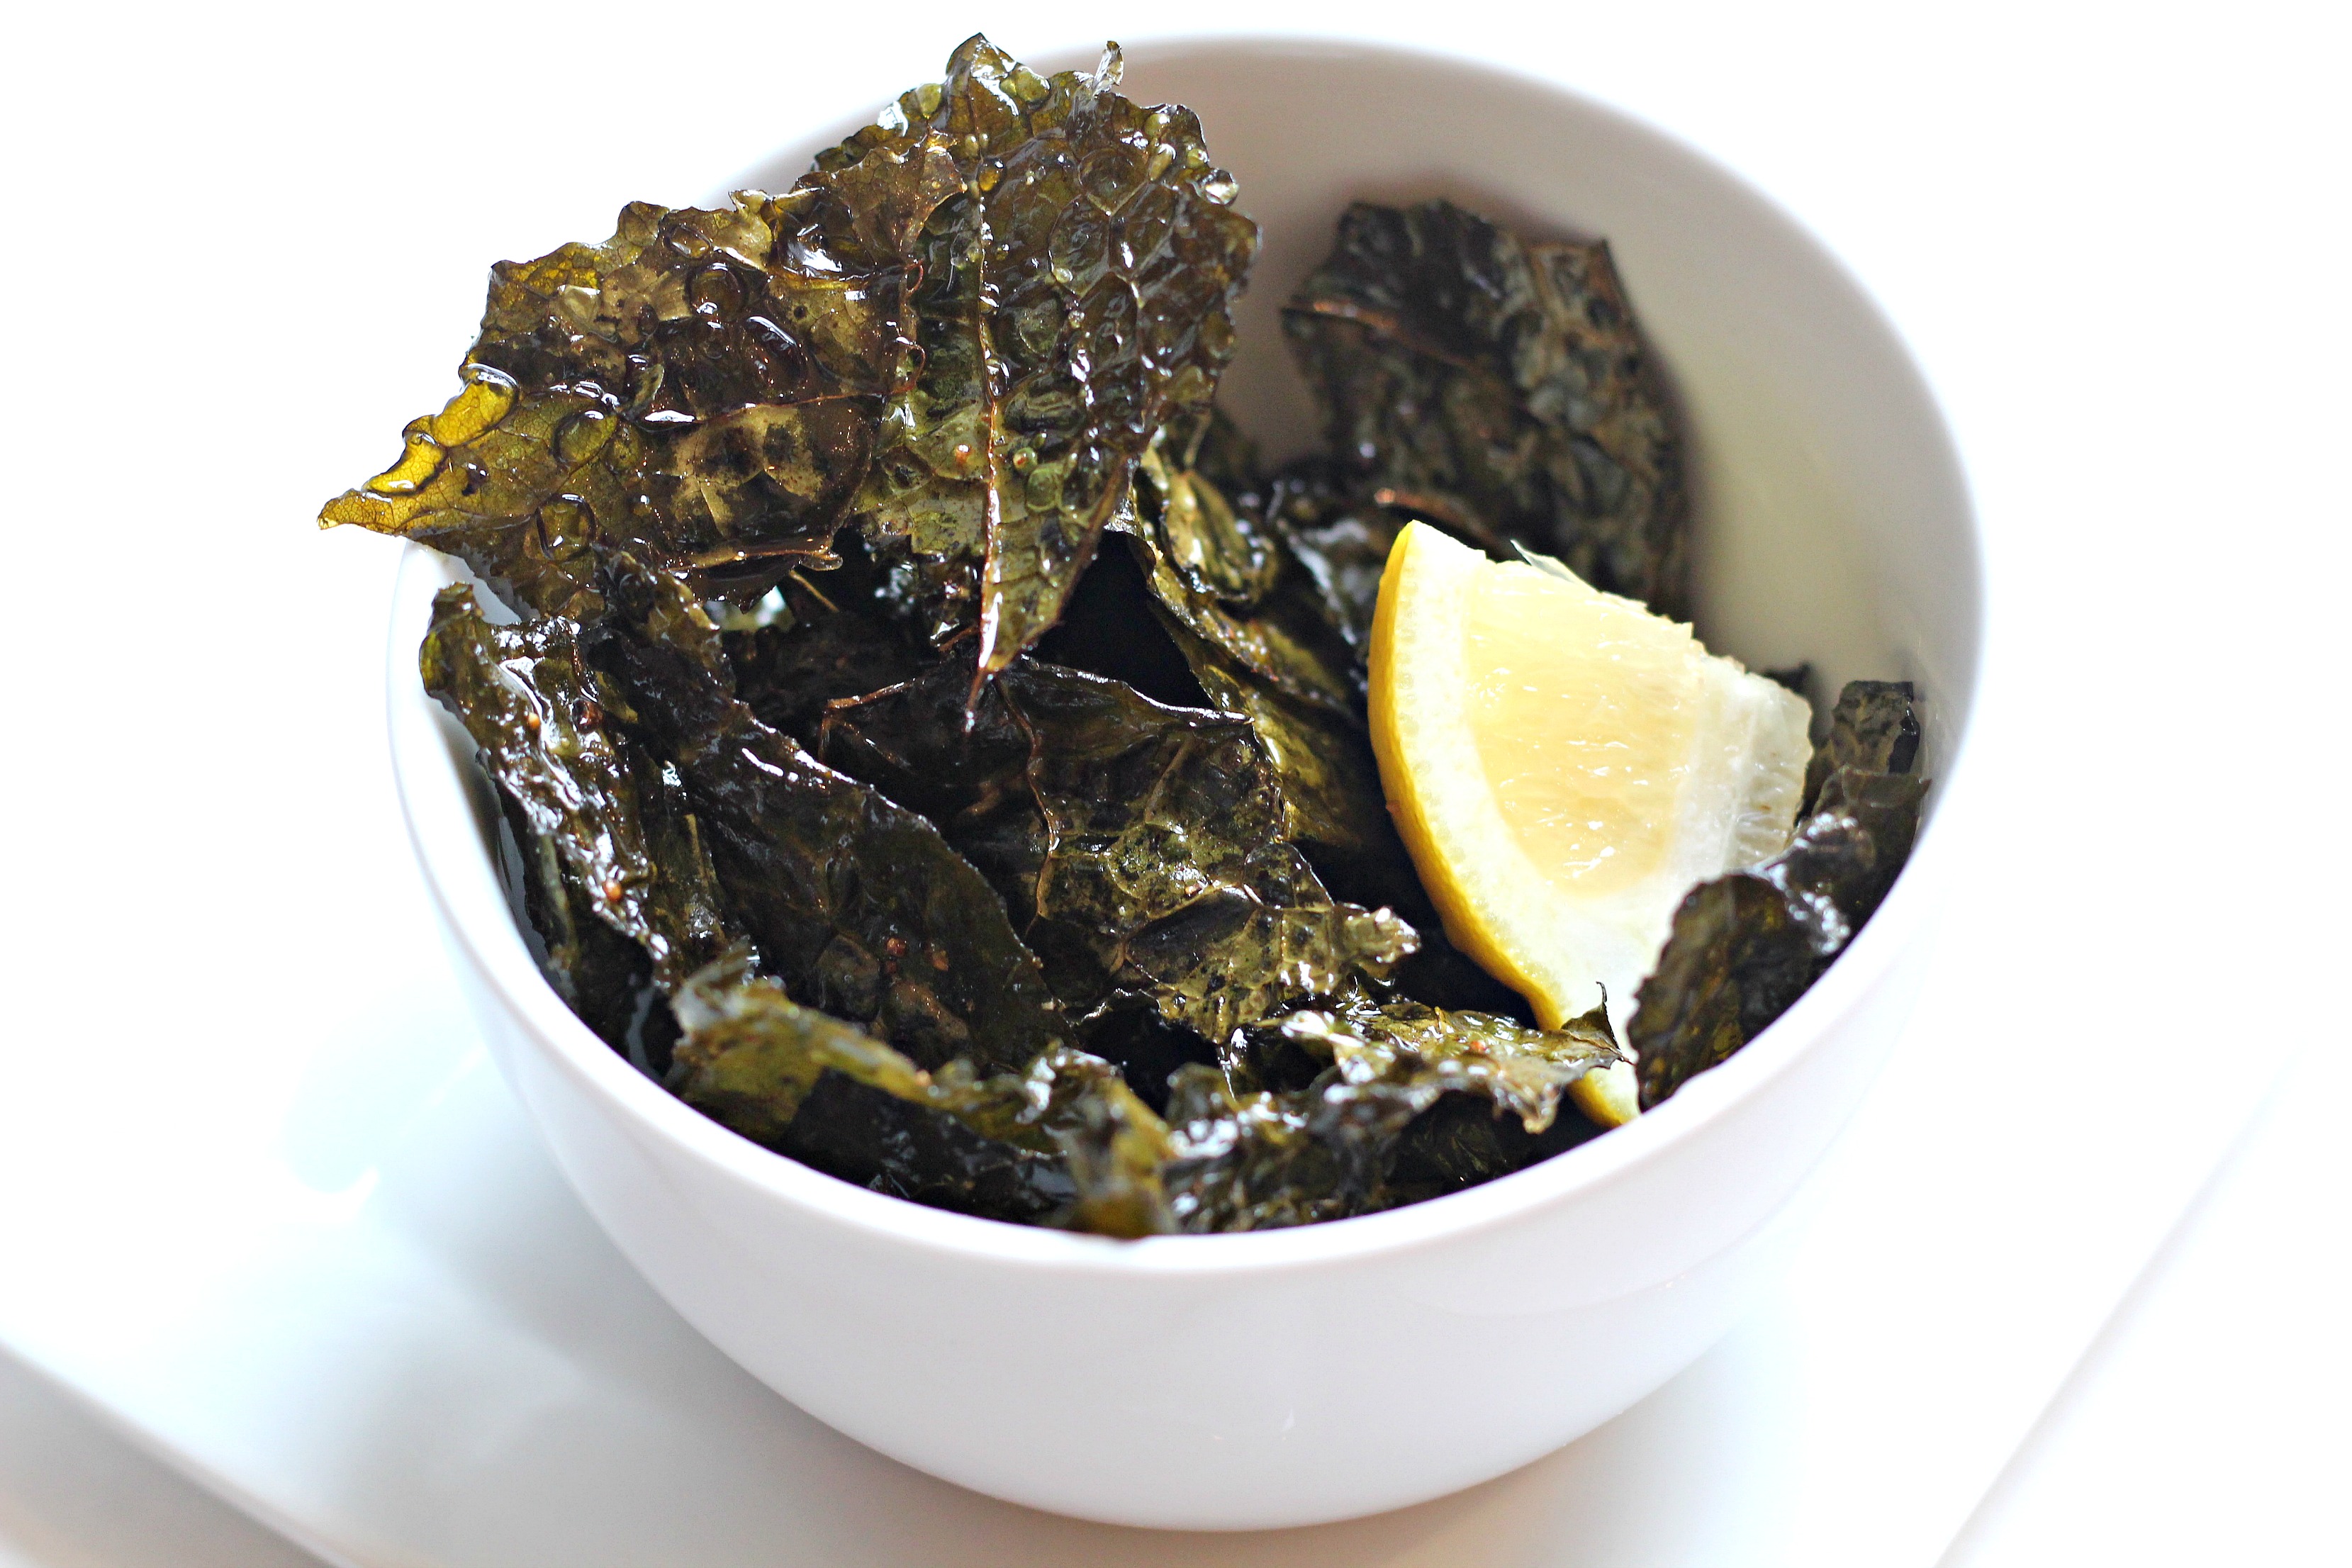 These Salt and Vinegar Kale Chips are the perfect afternoon snack! They have flavors like your favorite potato chips but the benefits of a superfood.